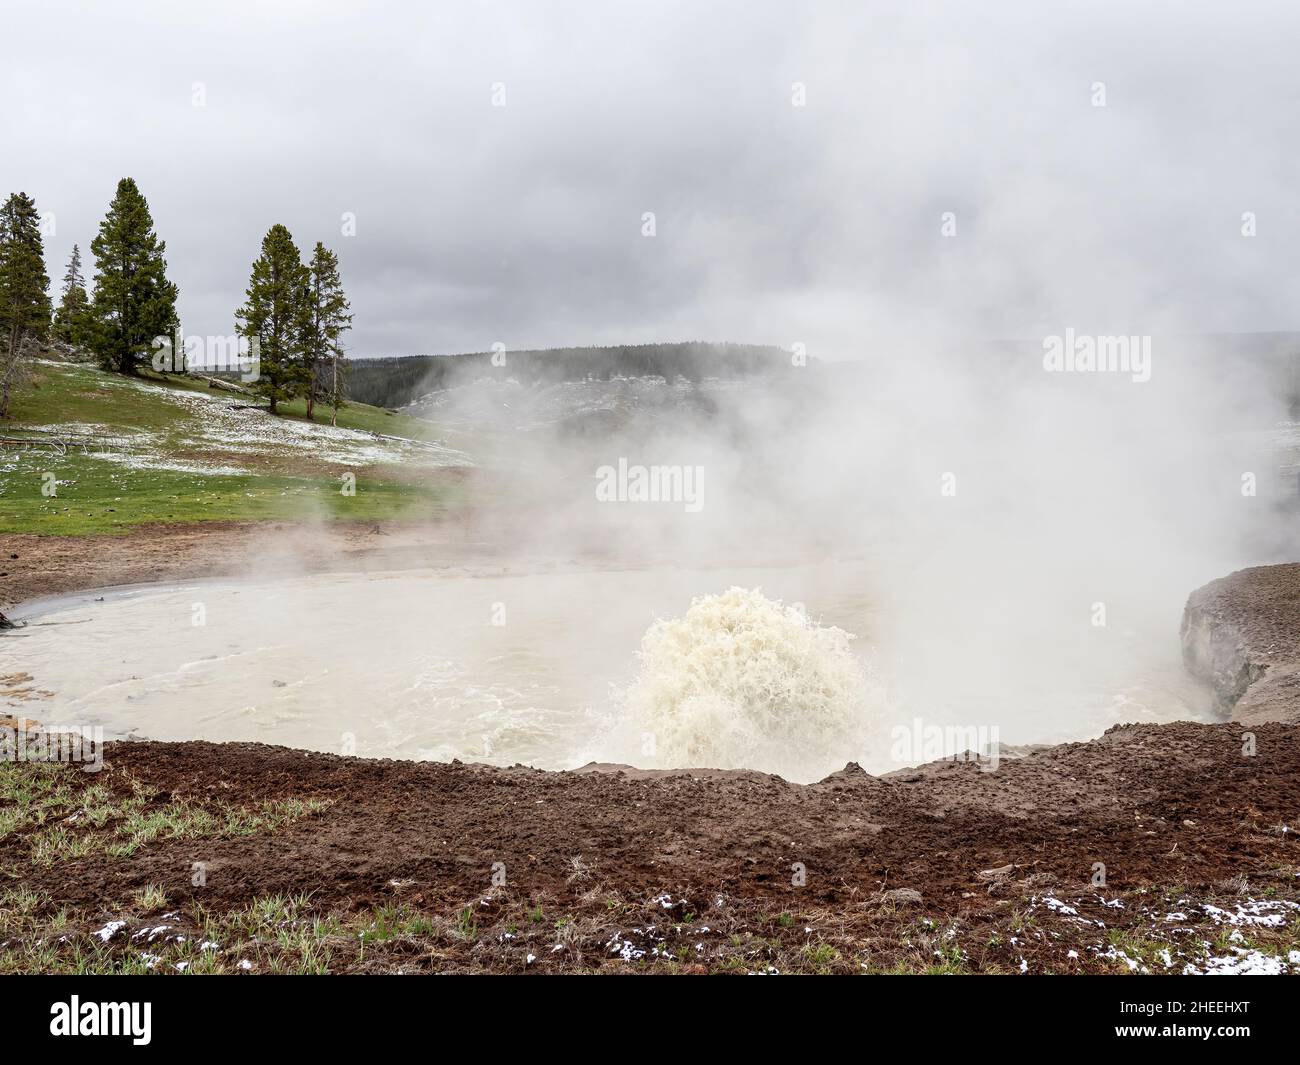 Mud pot in the mud volcano area of Yellowstone National Park, Wyoming. Stock Photo